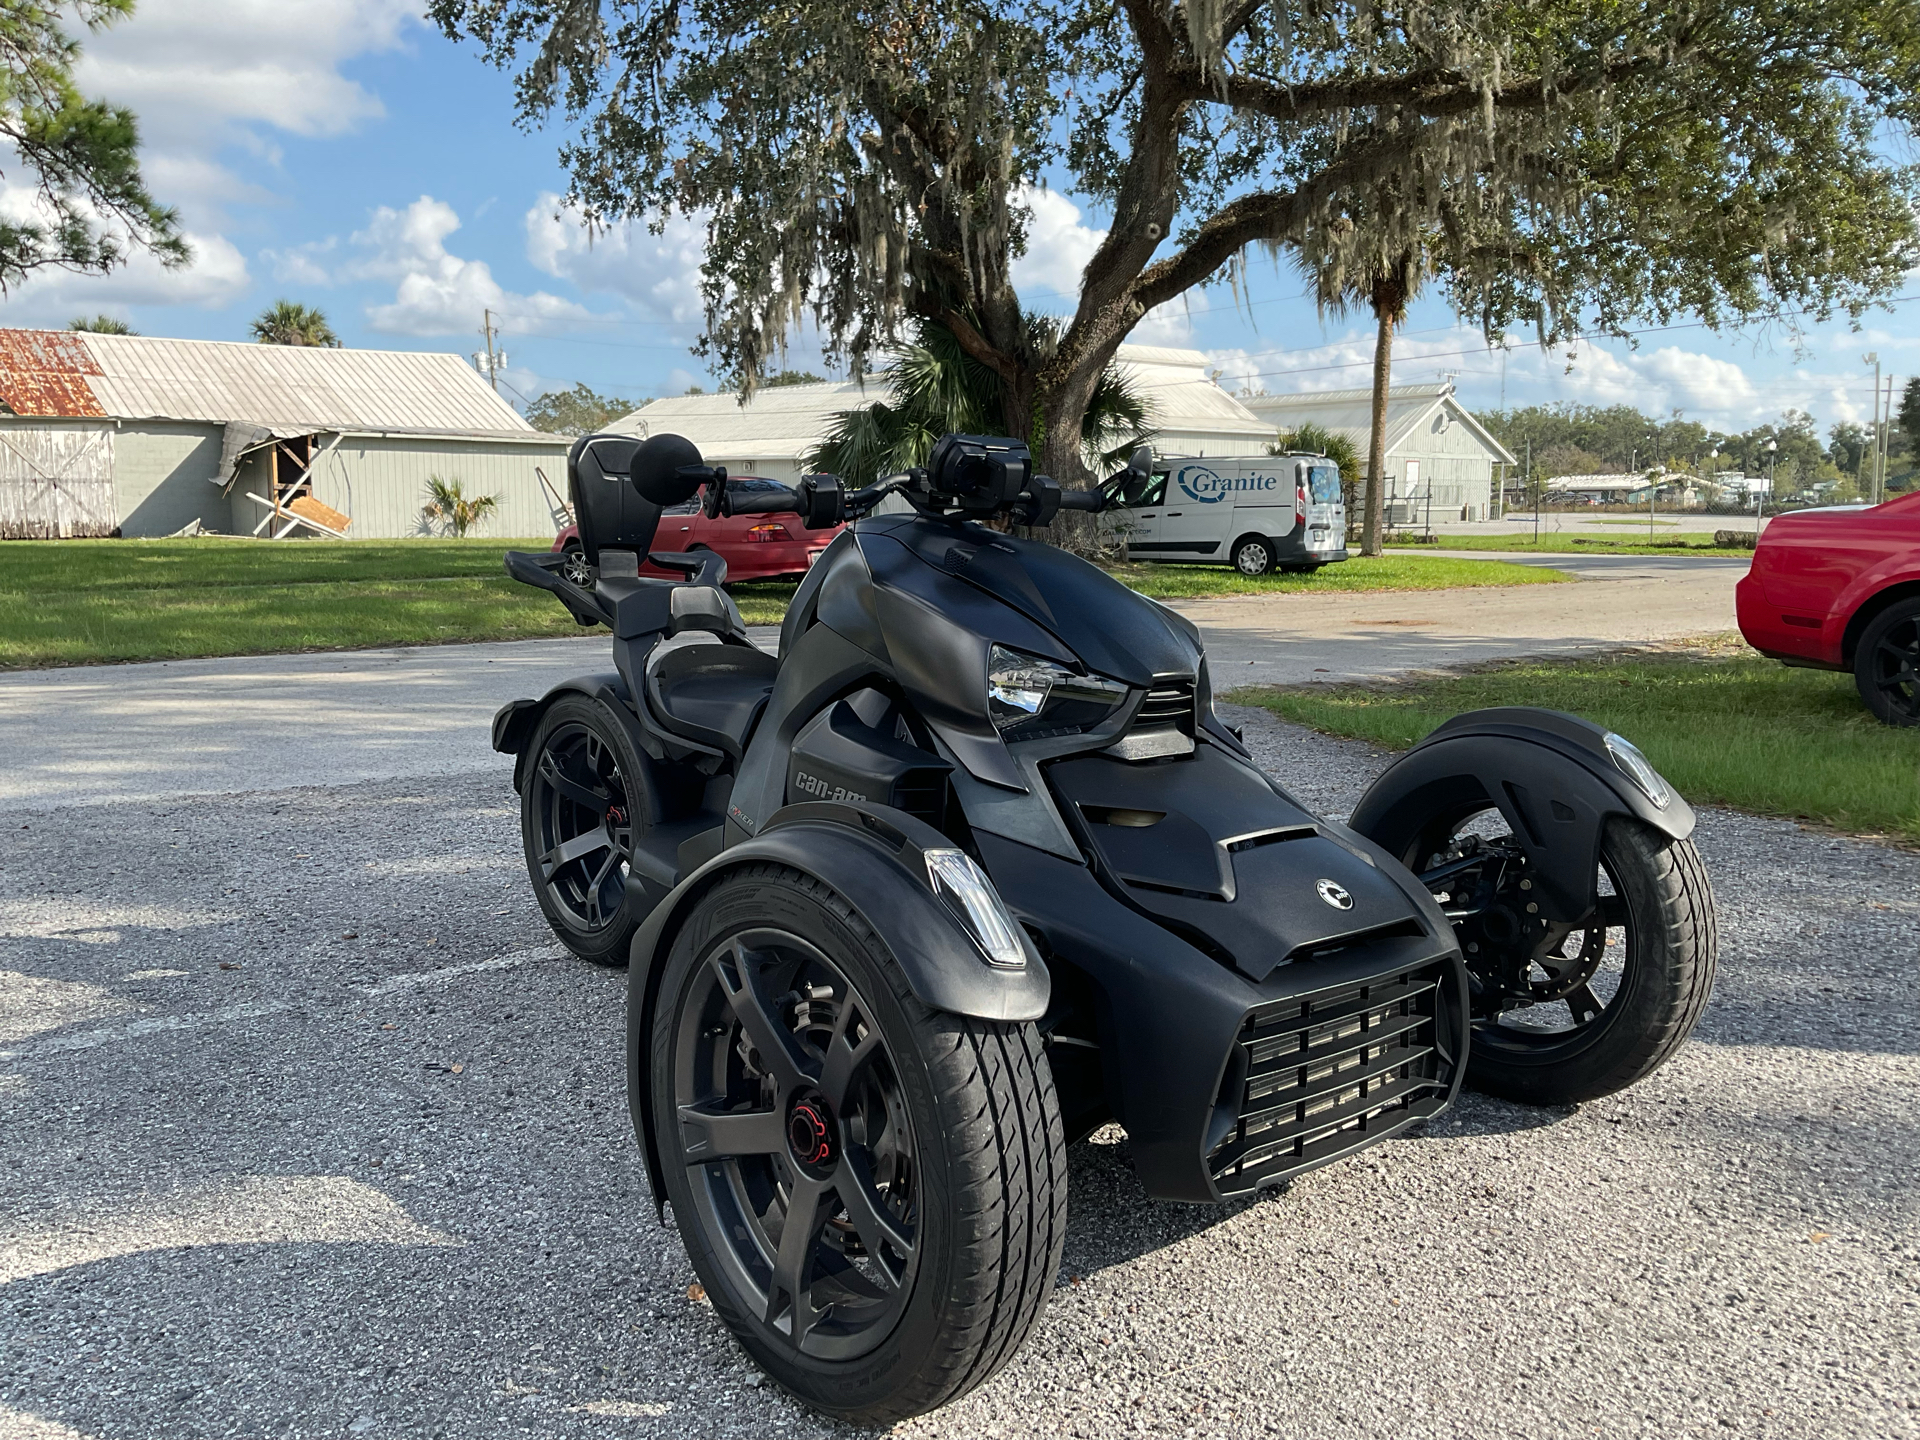 2019 Can-Am Ryker 900 ACE in Sanford, Florida - Photo 3